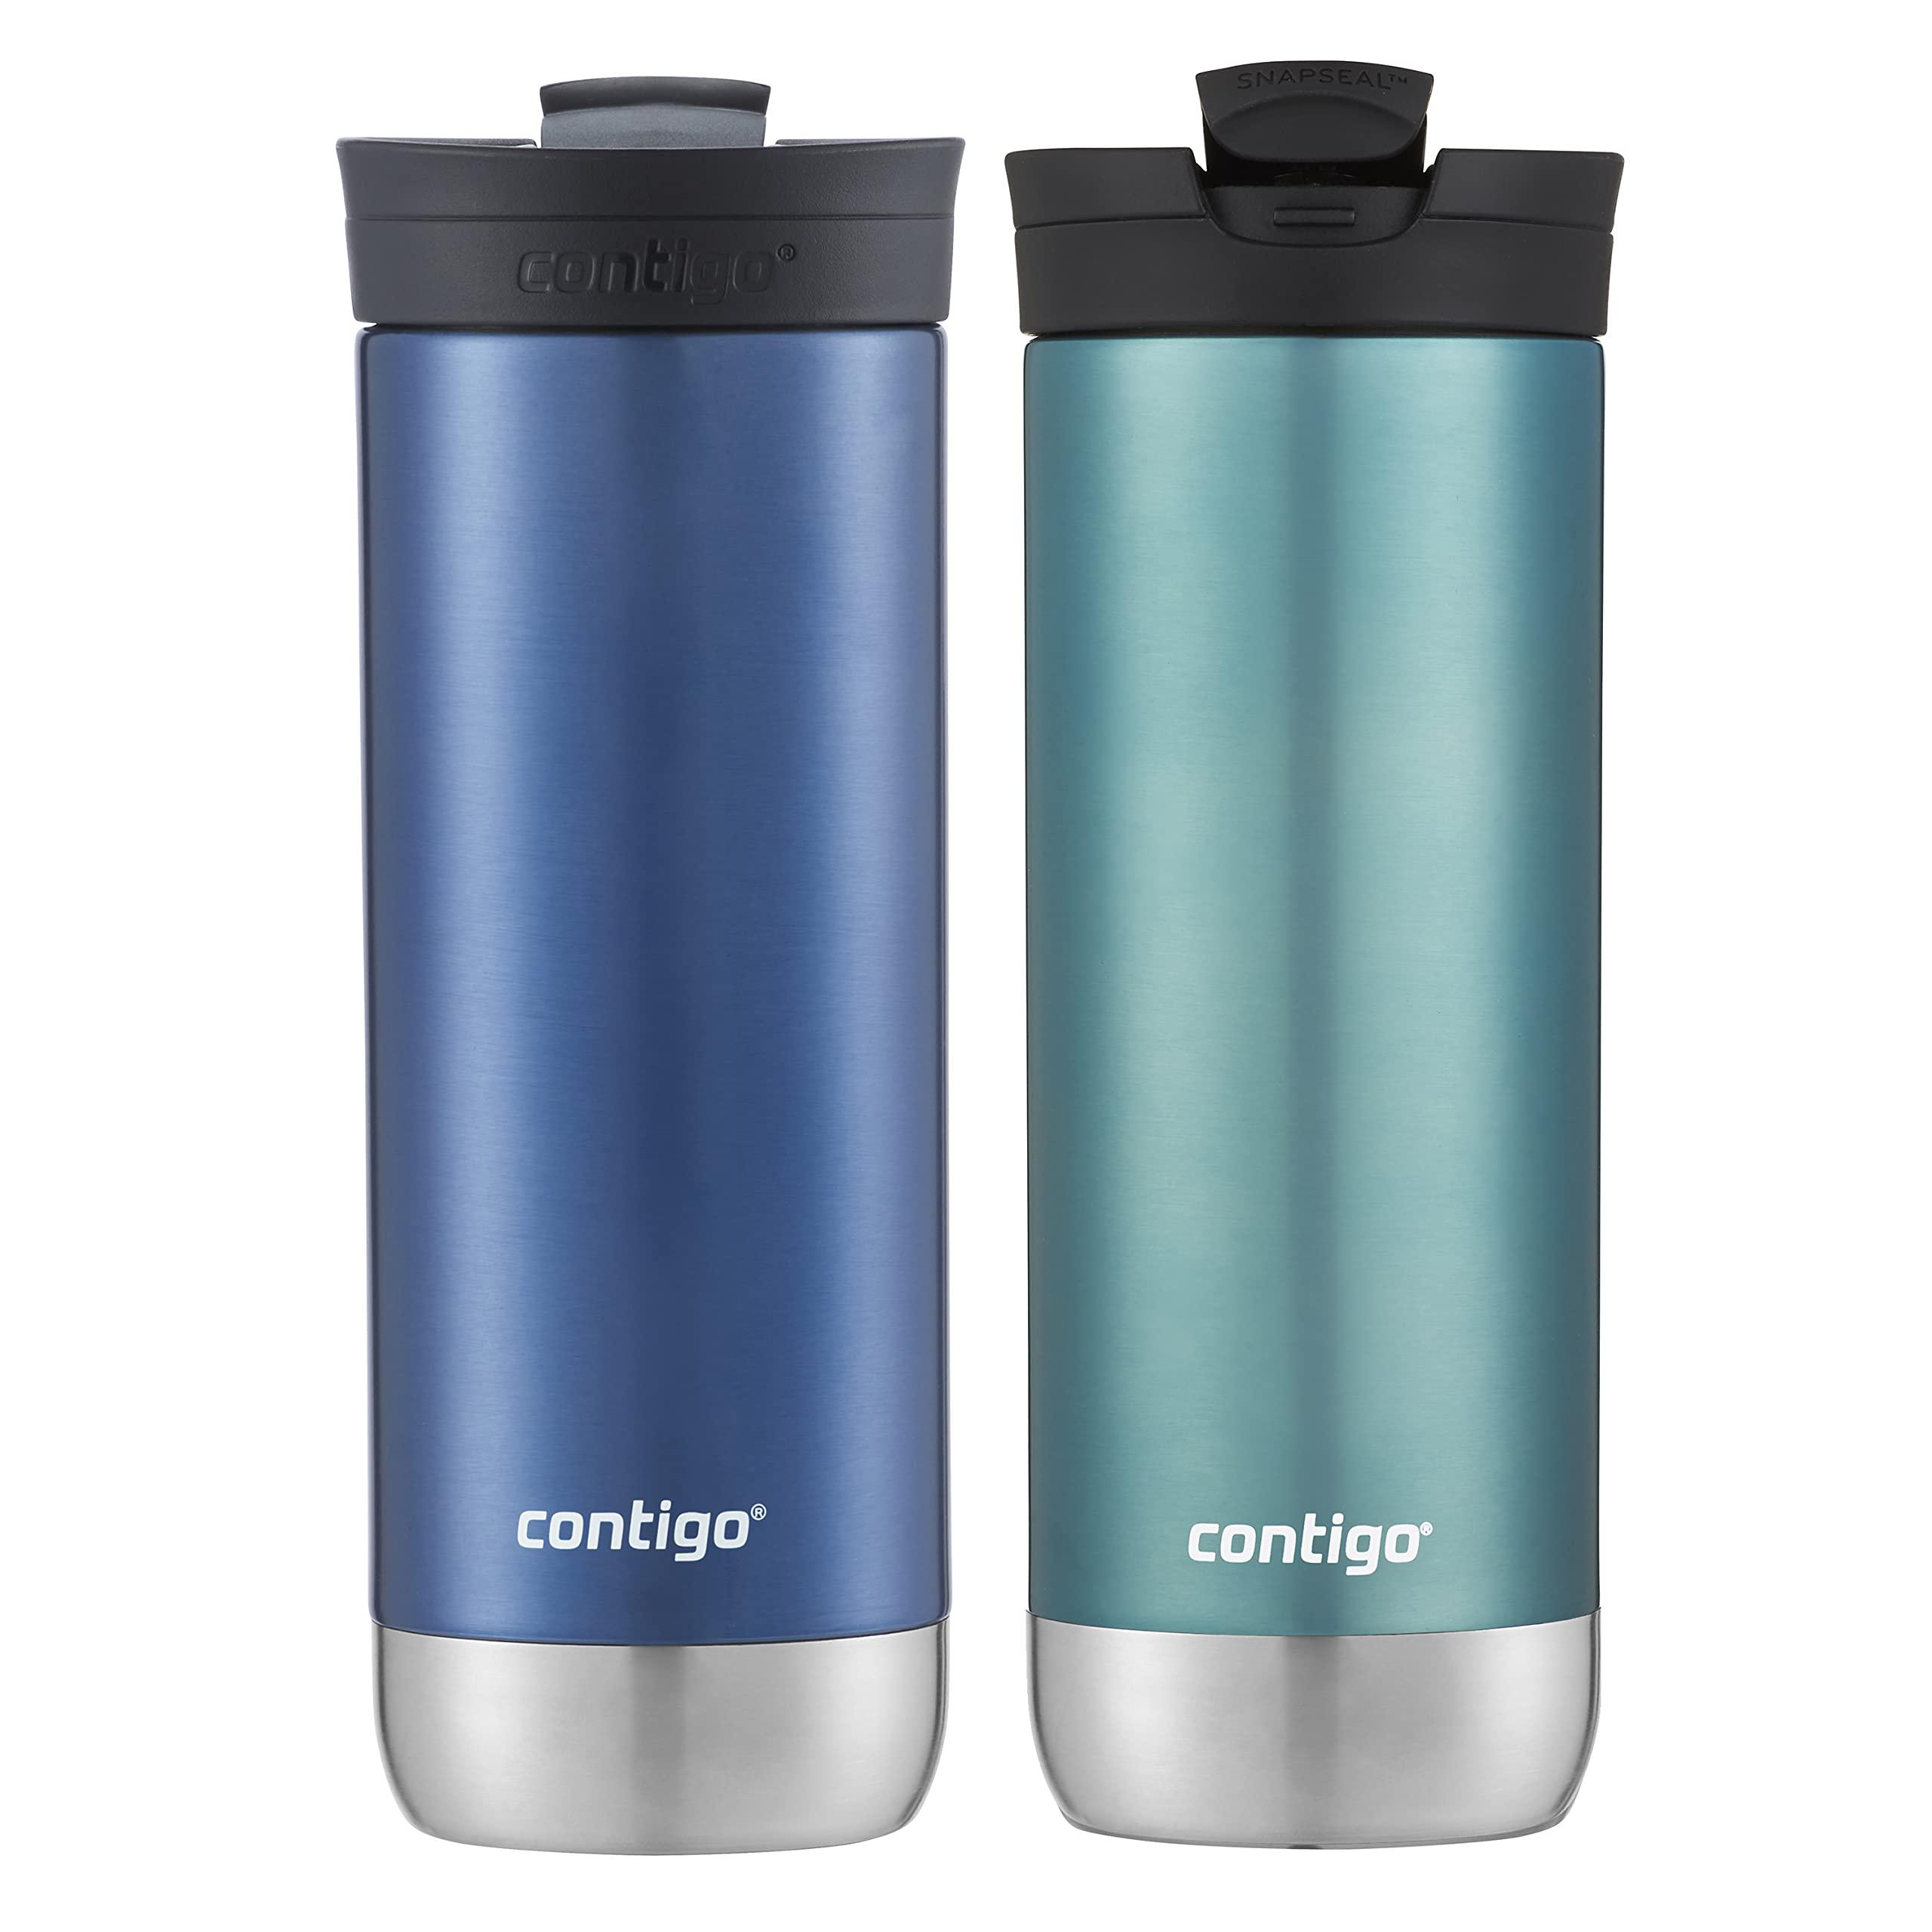 contigo huron vacuum-insulated stainless steel travel mug with leak-proof lid, keeps drinks hot or cold for hours, fits most 